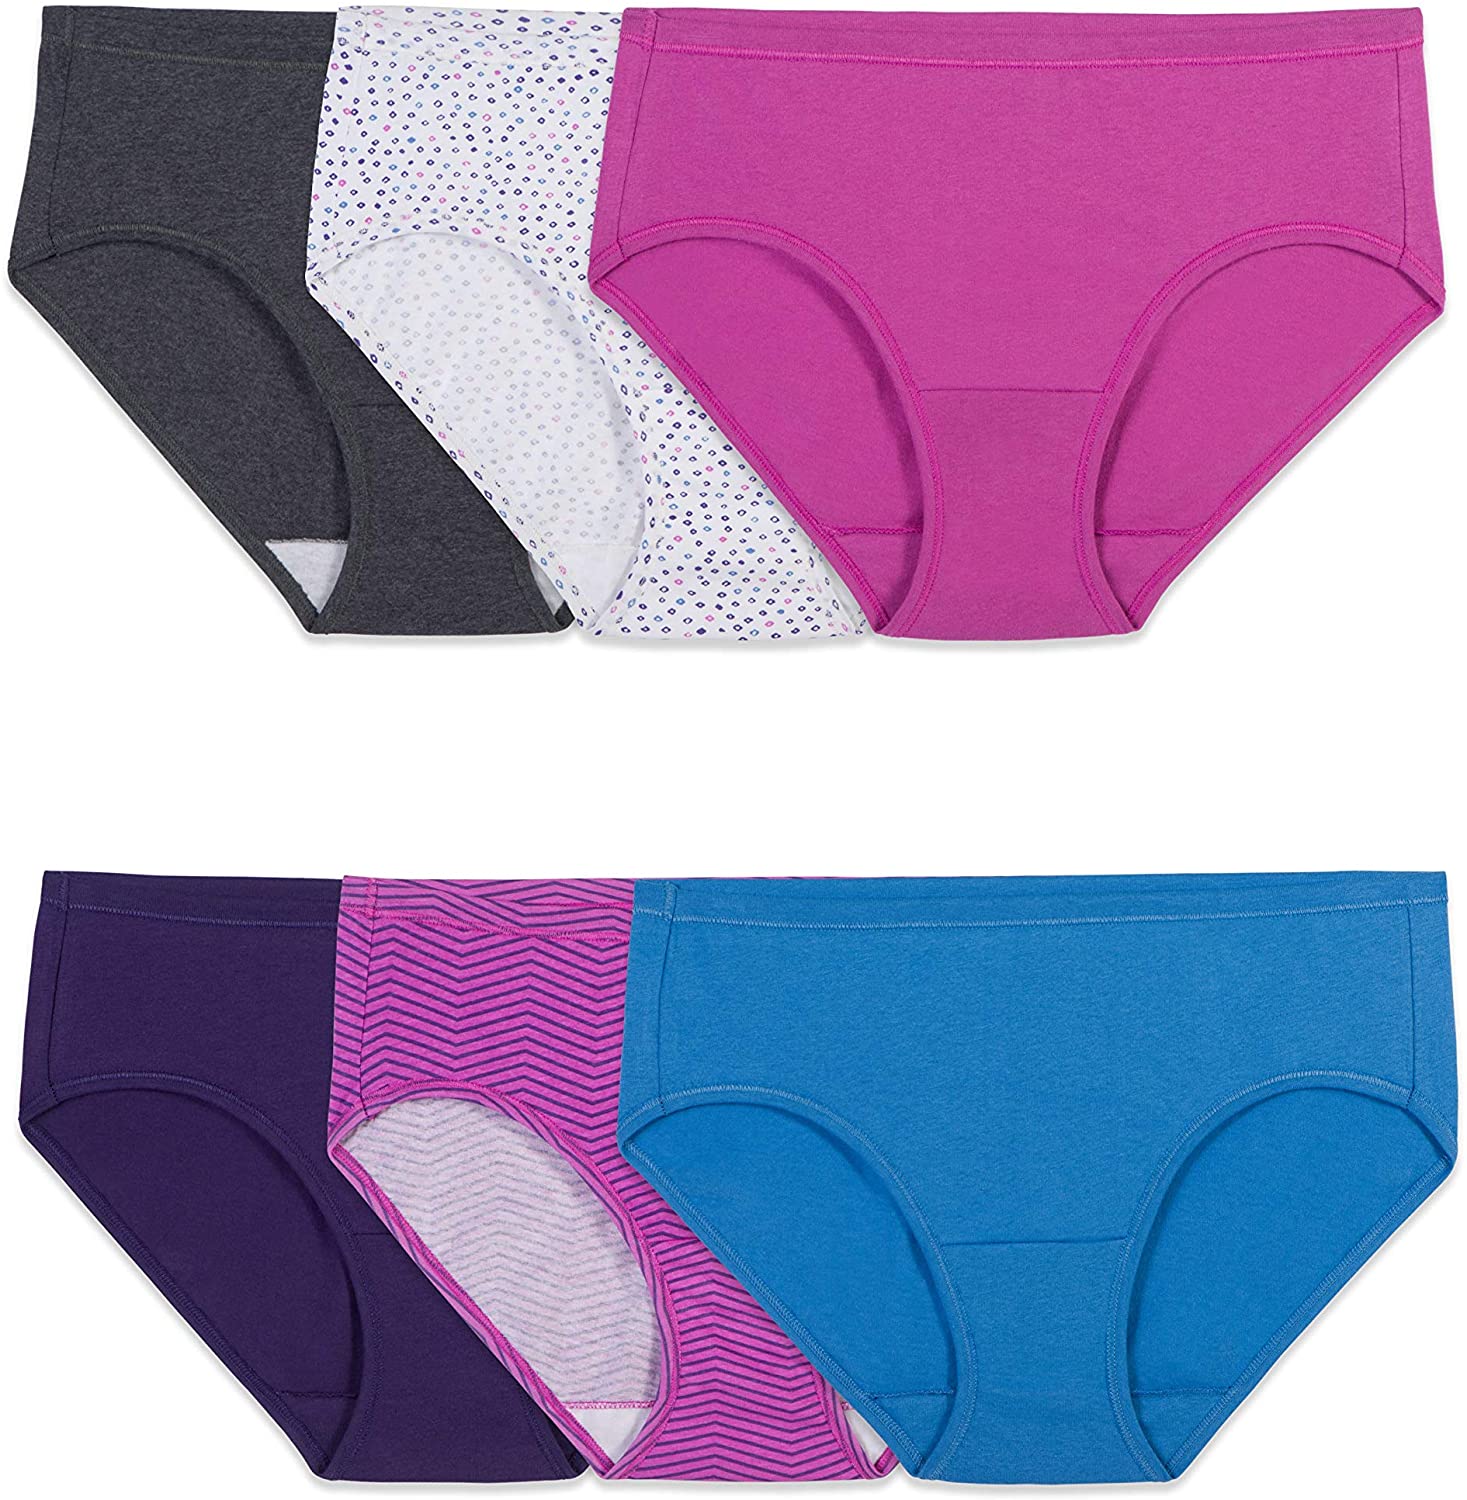 Fruit of the Loom Women's Hipster Panties (Pack of 5), assorted